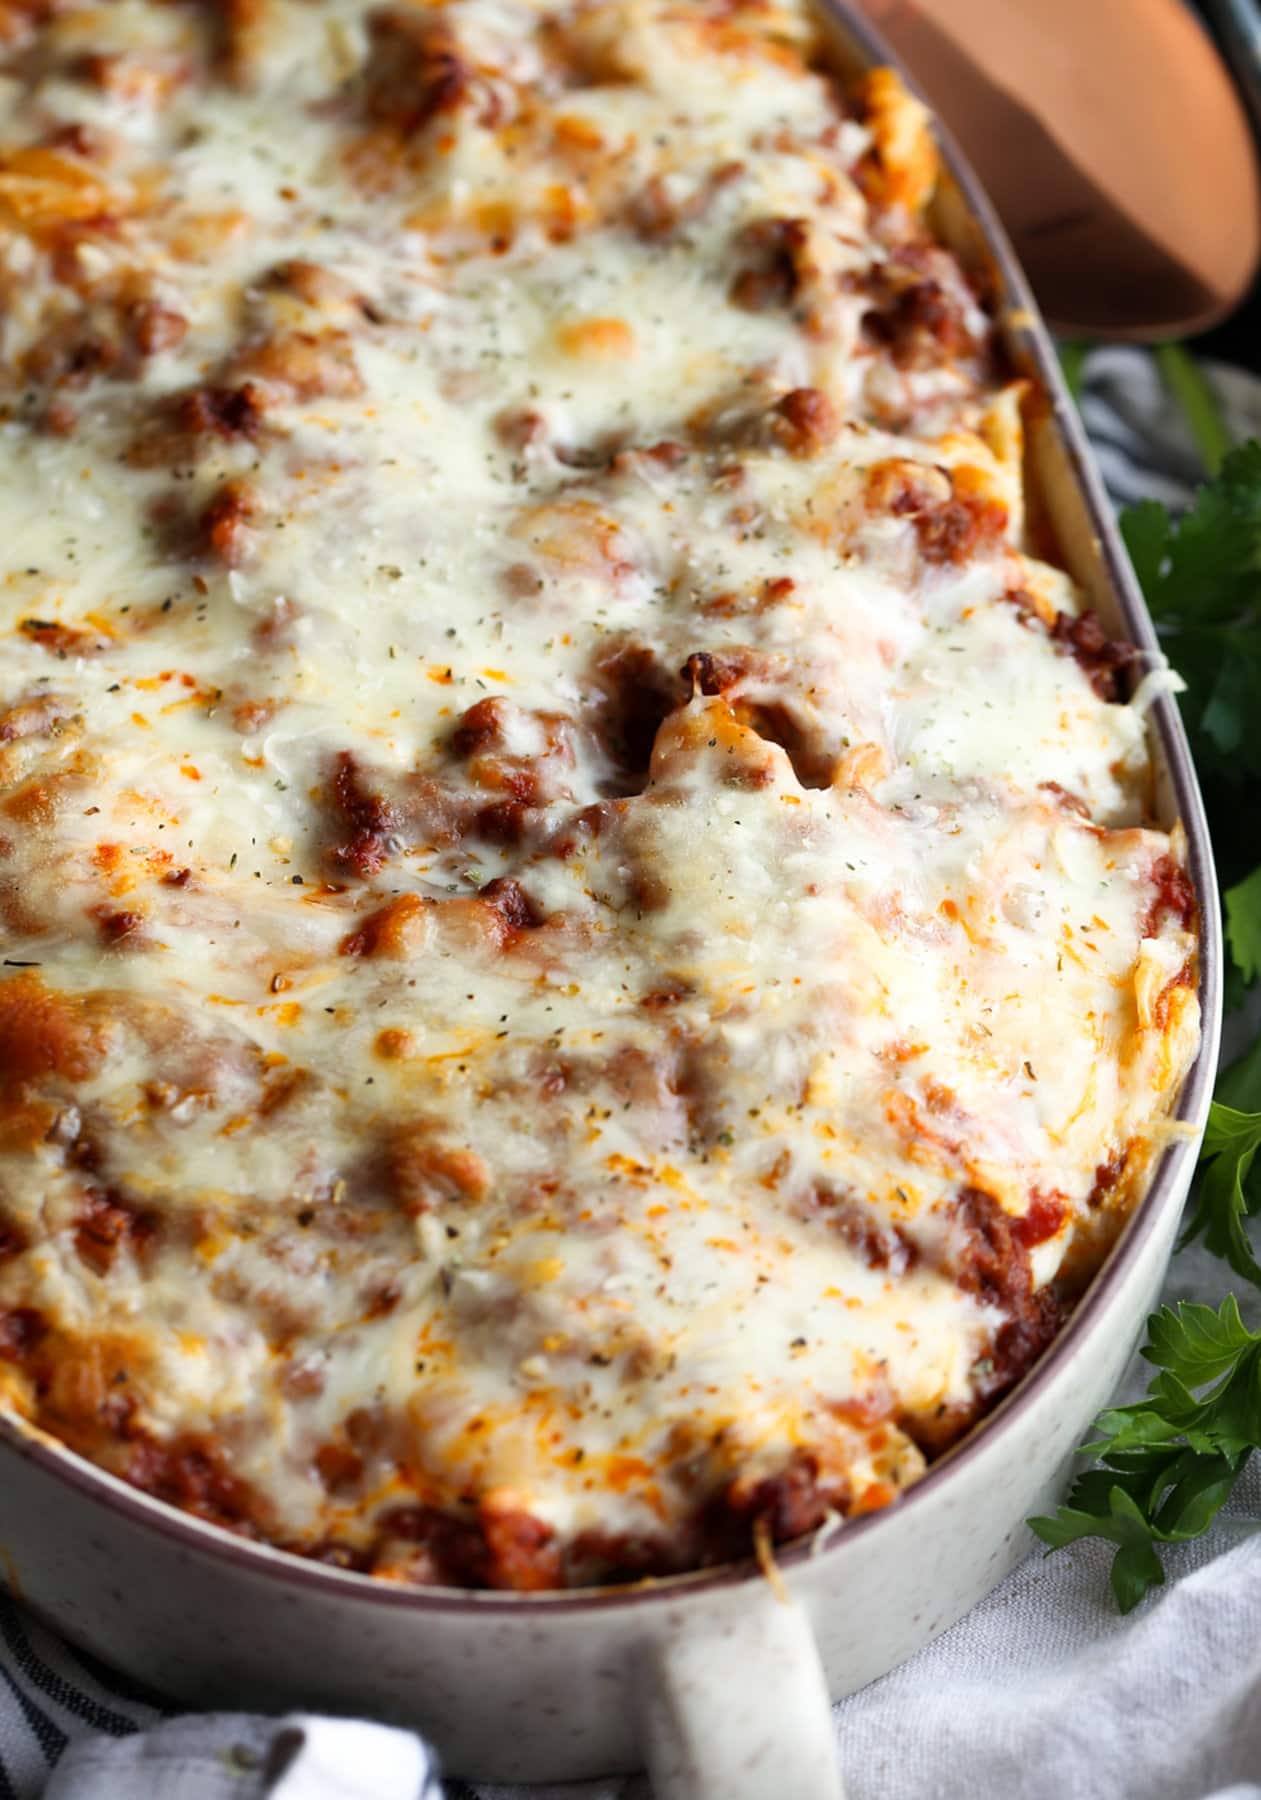 Baked shell pasta with meat and red sauce covered in mozzarella cheese baked in a casserole dish